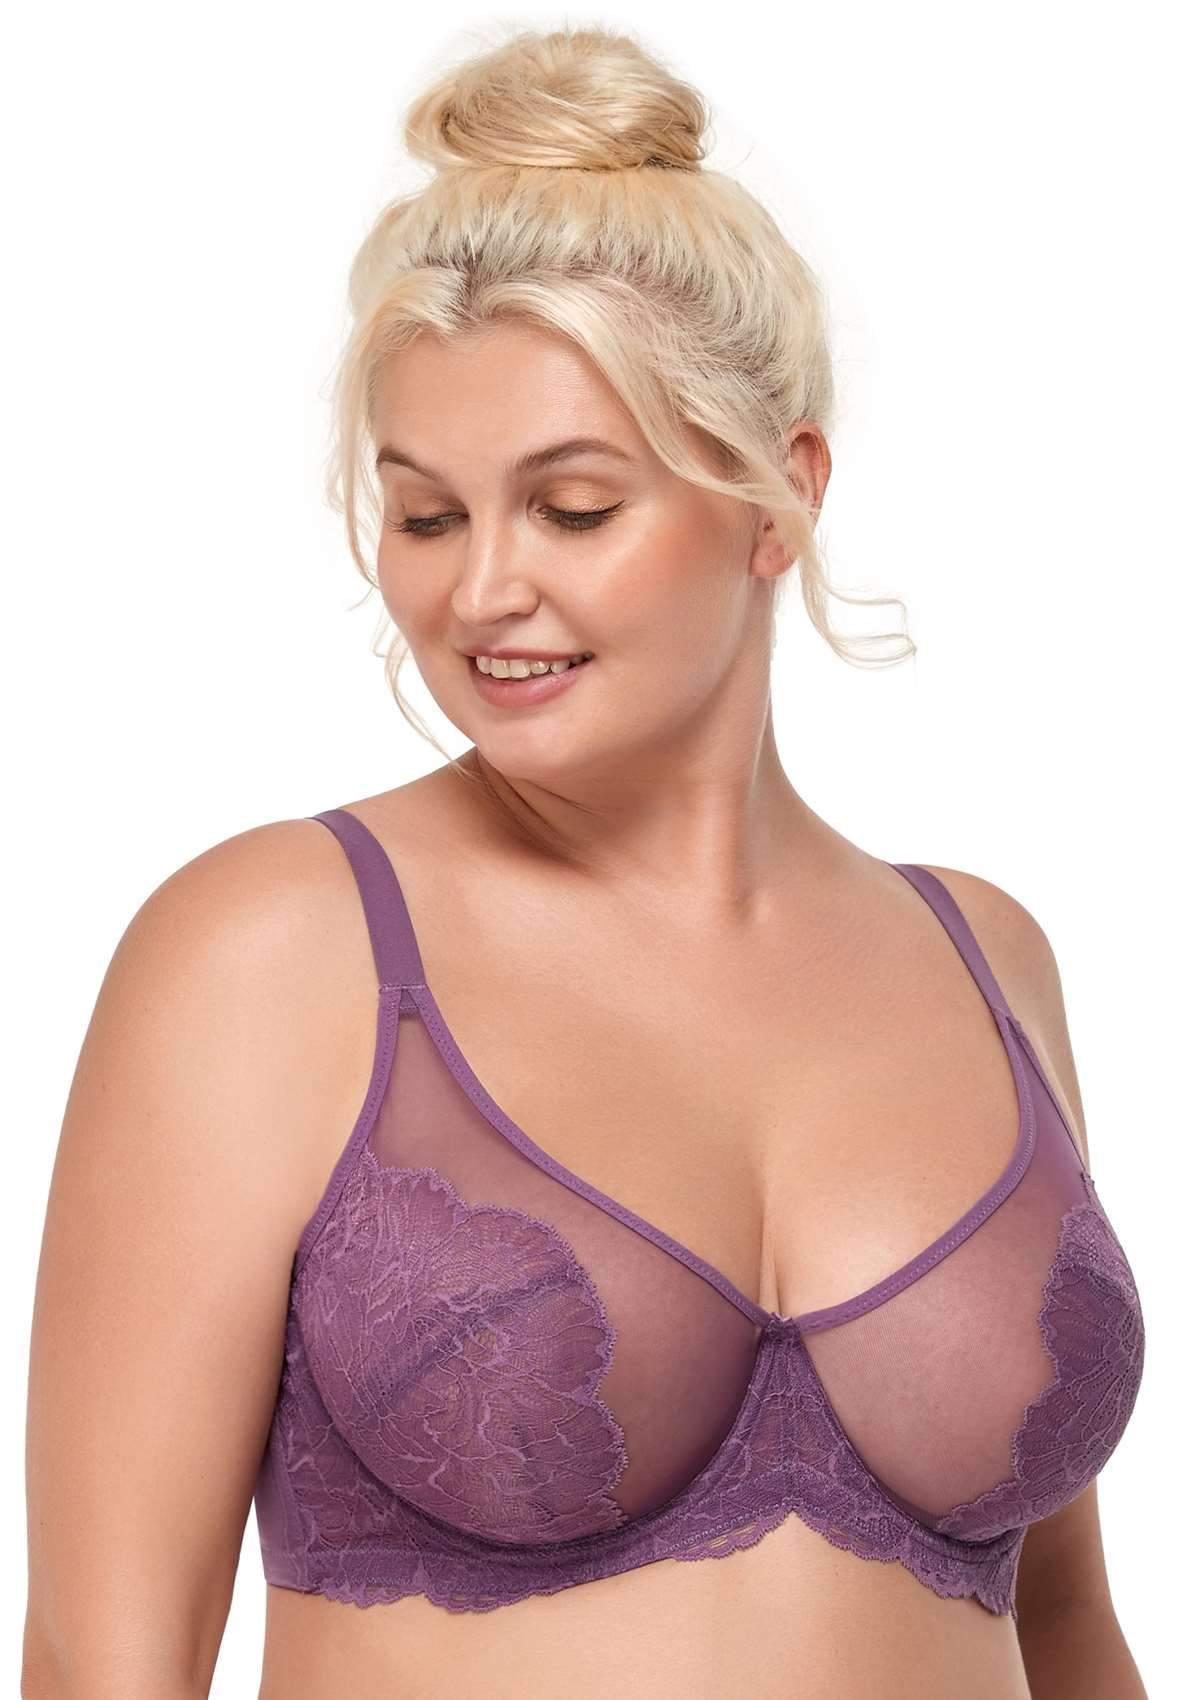 HSIA Blossom Transparent Lace Bra: Plus Size Wired Back Smoothing Bra - Purple / 36 / DDD/F